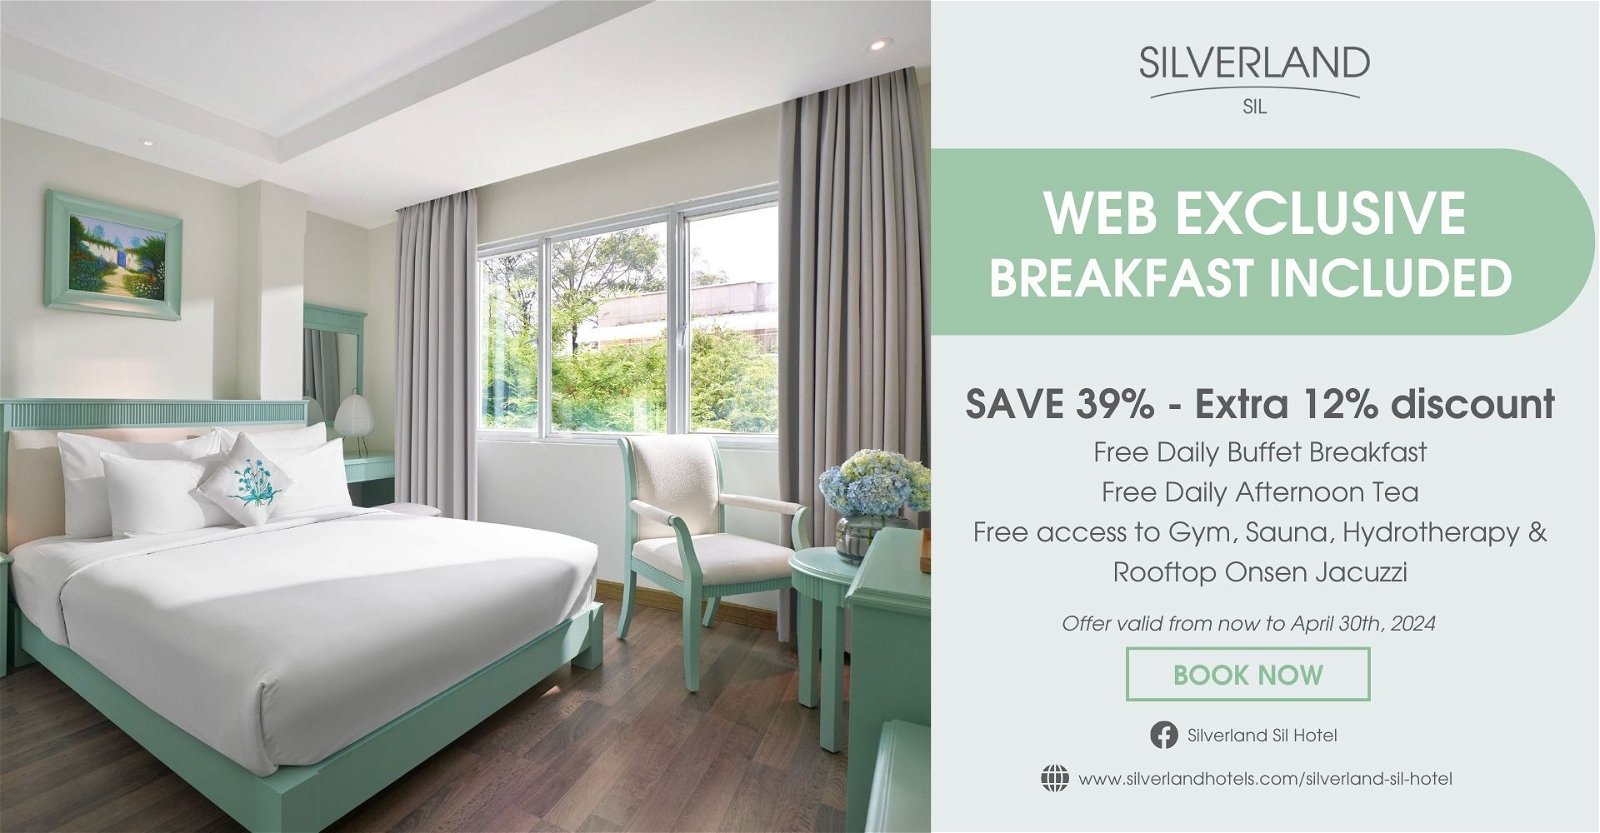 SILVERLAND SIL – WEB EXCLUSIVE – BREAKFAST INCLUDED (SAVE 39%)